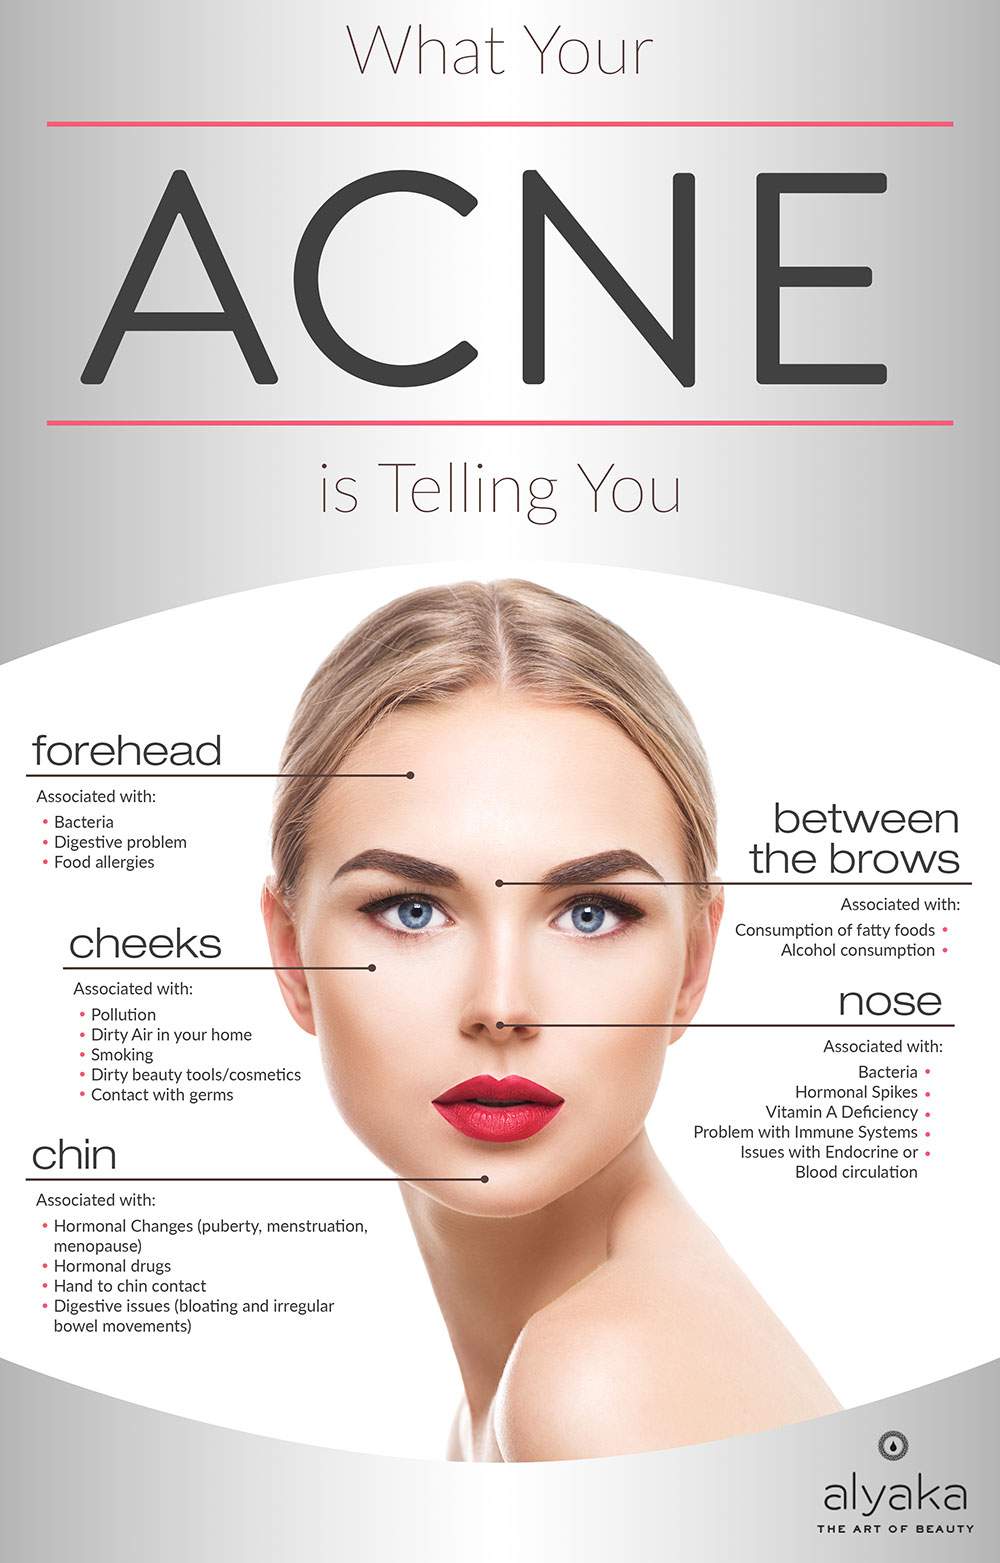 What Your Acne is Telling You